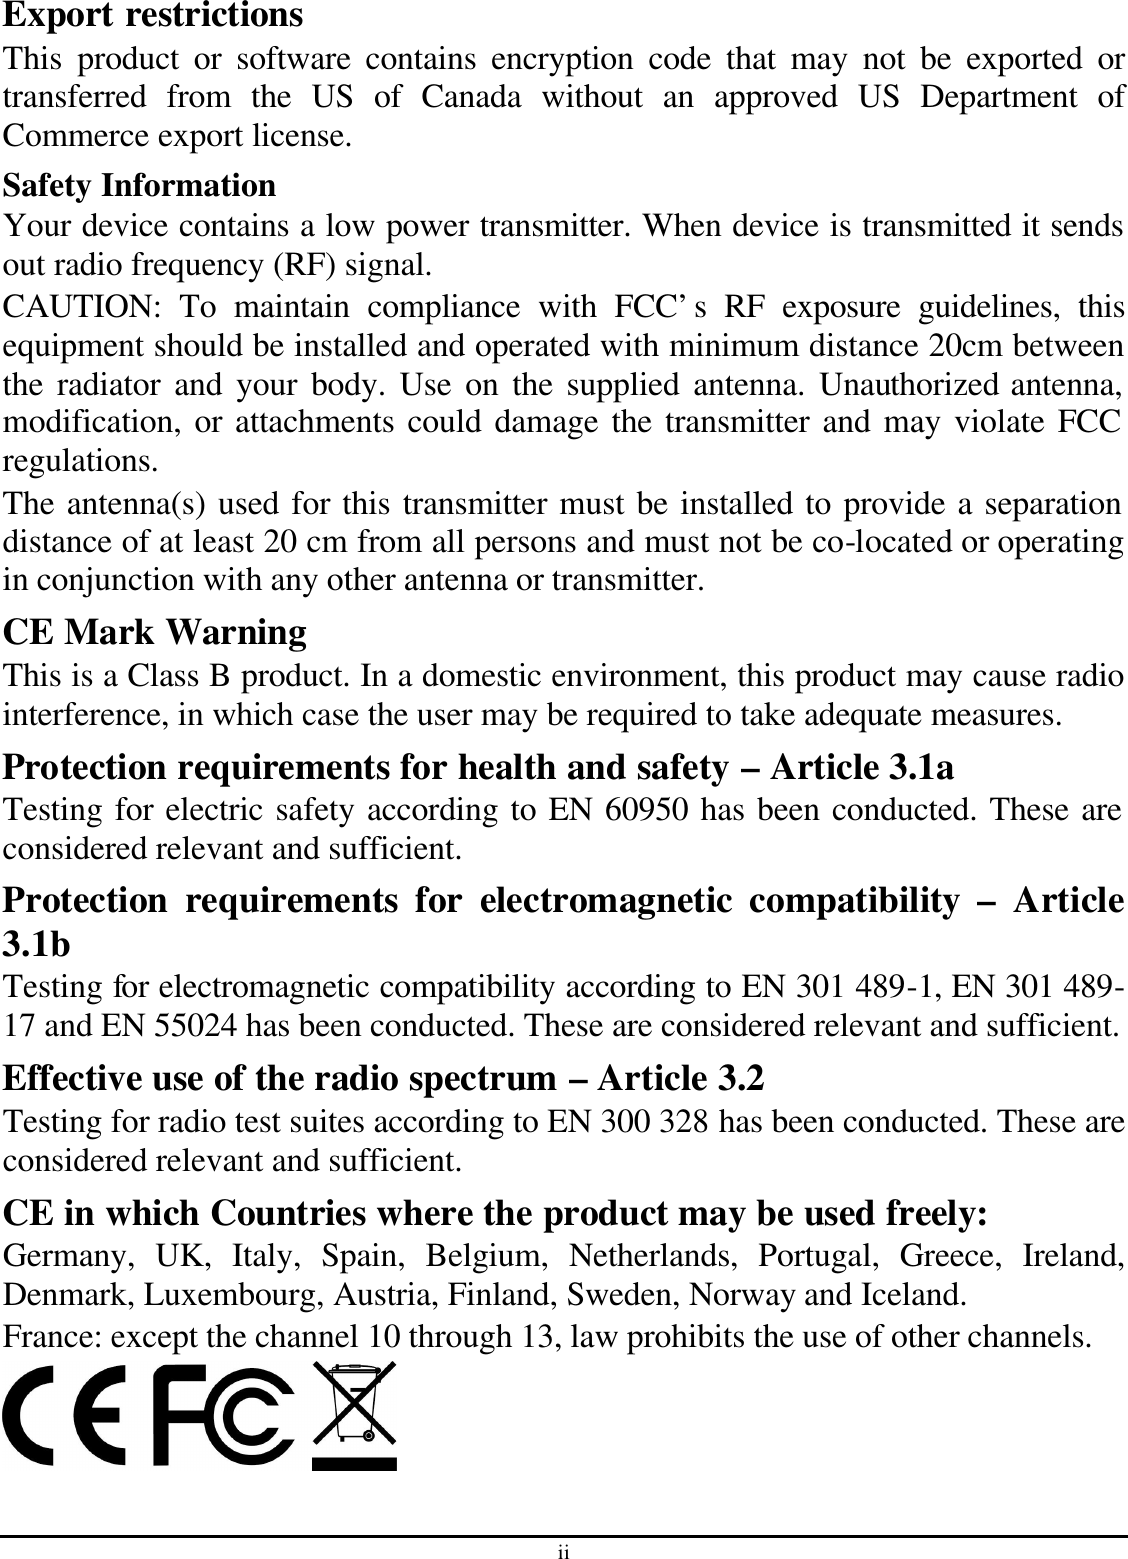 ii Export restrictions This product or software contains encryption code that may not be exported or transferred from the US of Canada without an approved US Department of Commerce export license. Safety Information Your device contains a low power transmitter. When device is transmitted it sends out radio frequency (RF) signal. CAUTION: To maintain compliance with FCC’s RF exposure guidelines, this equipment should be installed and operated with minimum distance 20cm between the radiator and your body. Use on the supplied antenna. Unauthorized antenna, modification, or attachments could damage the transmitter and may violate FCC regulations. The antenna(s) used for this transmitter must be installed to provide a separation distance of at least 20 cm from all persons and must not be co-located or operating in conjunction with any other antenna or transmitter. CE Mark Warning This is a Class B product. In a domestic environment, this product may cause radio interference, in which case the user may be required to take adequate measures. Protection requirements for health and safety – Article 3.1a Testing for electric safety according to EN 60950 has been conducted. These are considered relevant and sufficient. Protection requirements for electromagnetic compatibility – Article 3.1b Testing for electromagnetic compatibility according to EN 301 489-1, EN 301 489-17 and EN 55024 has been conducted. These are considered relevant and sufficient. Effective use of the radio spectrum – Article 3.2 Testing for radio test suites according to EN 300 328 has been conducted. These are considered relevant and sufficient. CE in which Countries where the product may be used freely: Germany, UK, Italy, Spain, Belgium, Netherlands, Portugal, Greece, Ireland, Denmark, Luxembourg, Austria, Finland, Sweden, Norway and Iceland. France: except the channel 10 through 13, law prohibits the use of other channels.  